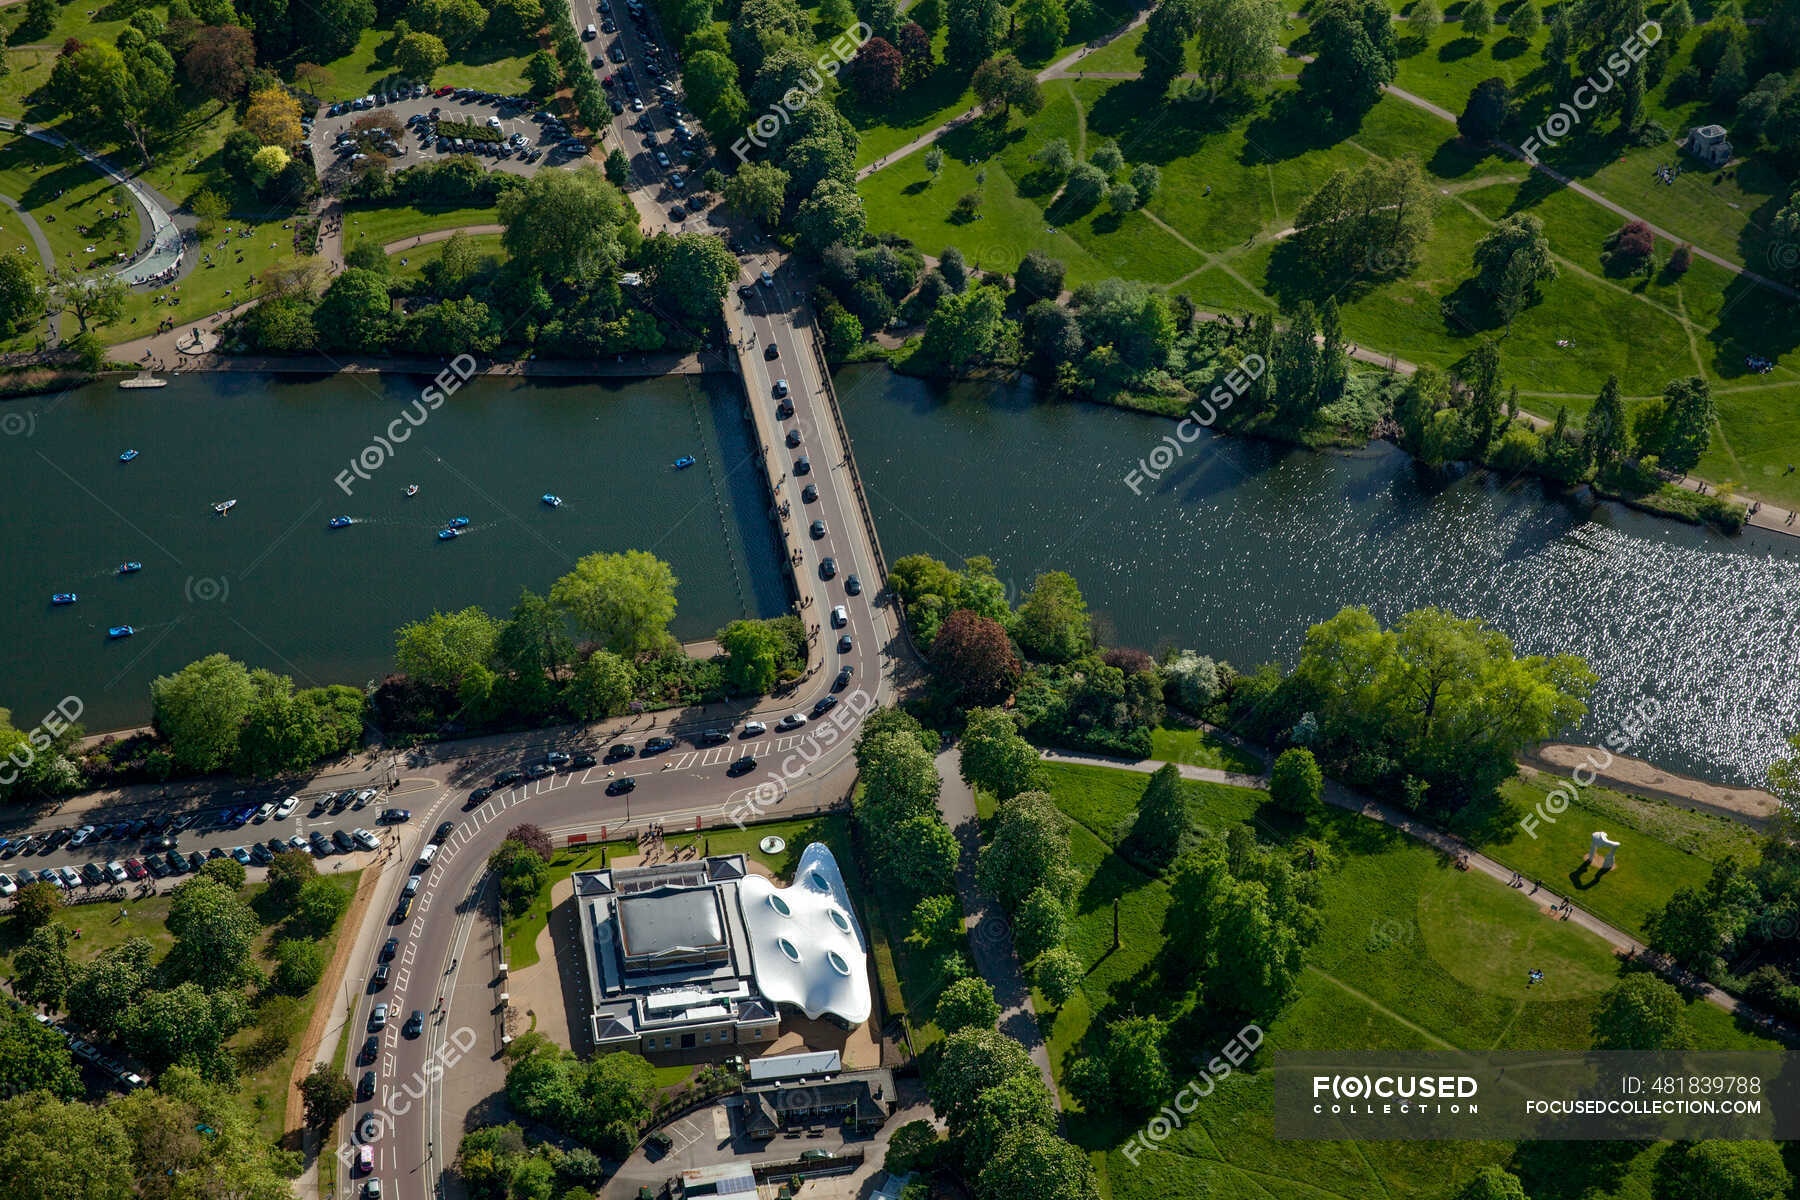 Uk London Aerial View Of Hyde Park And Bridge Over The Serpentine